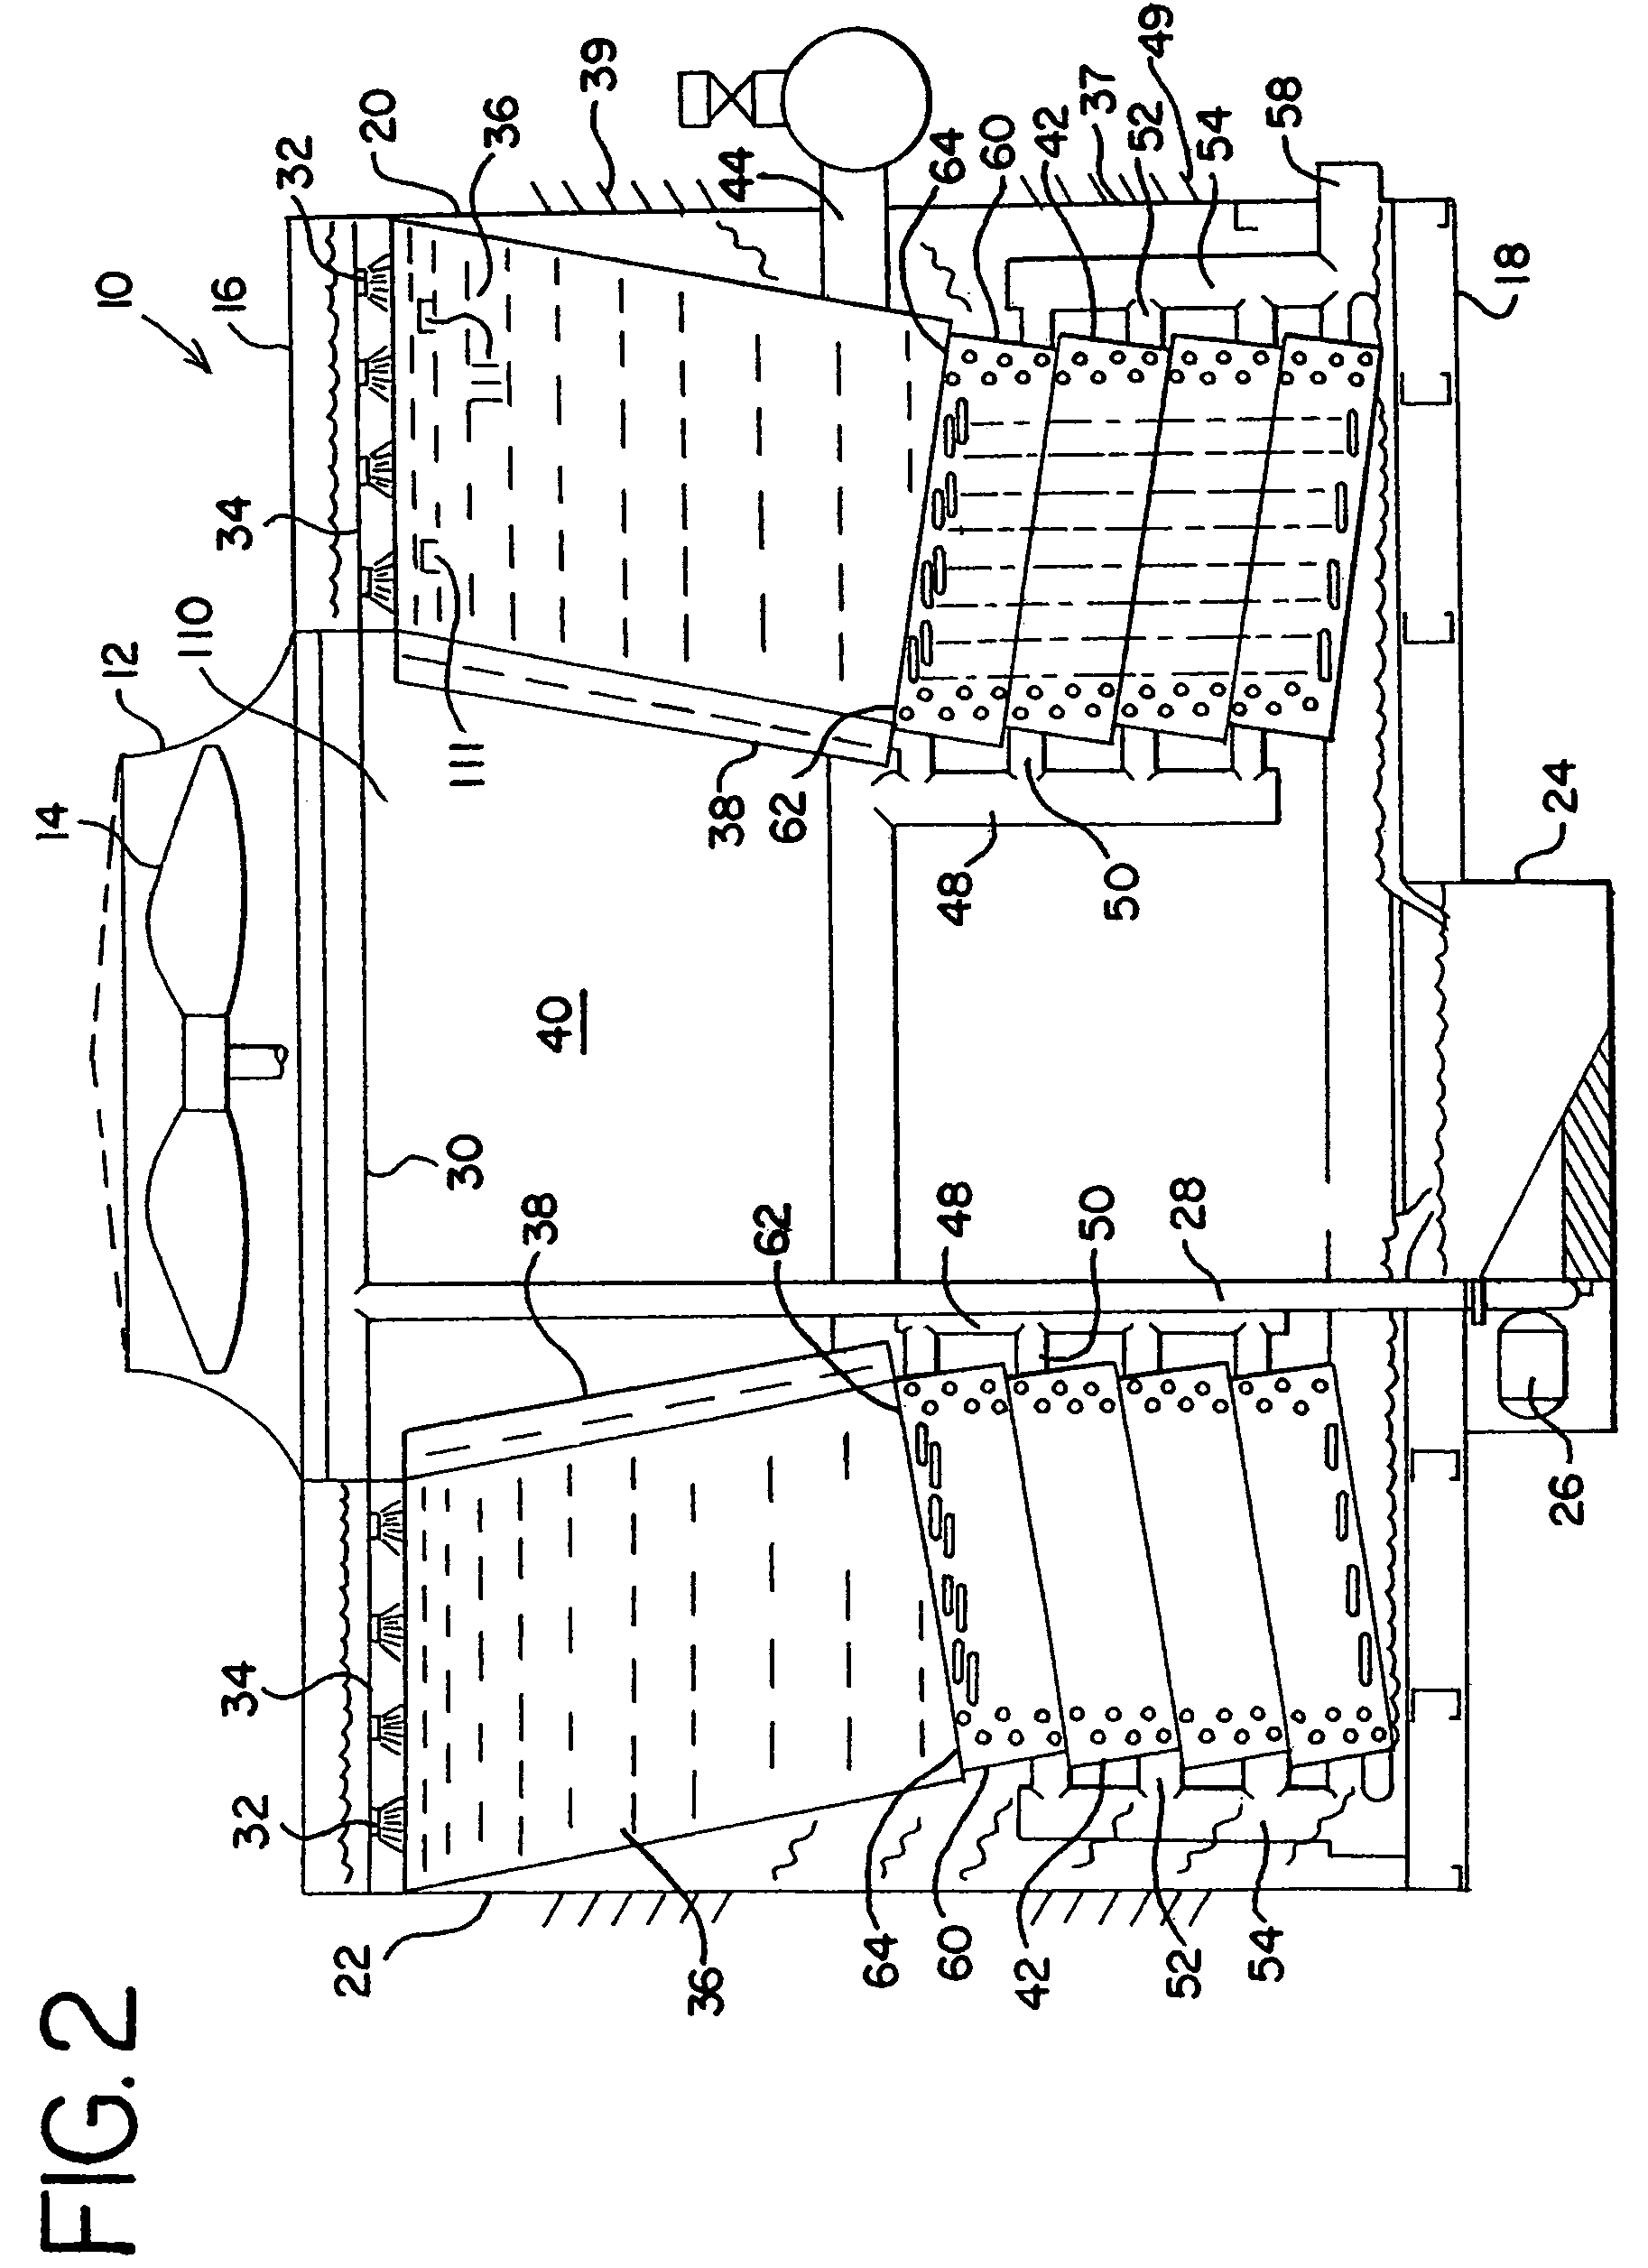 Cooling tower with direct and indirect cooling sections